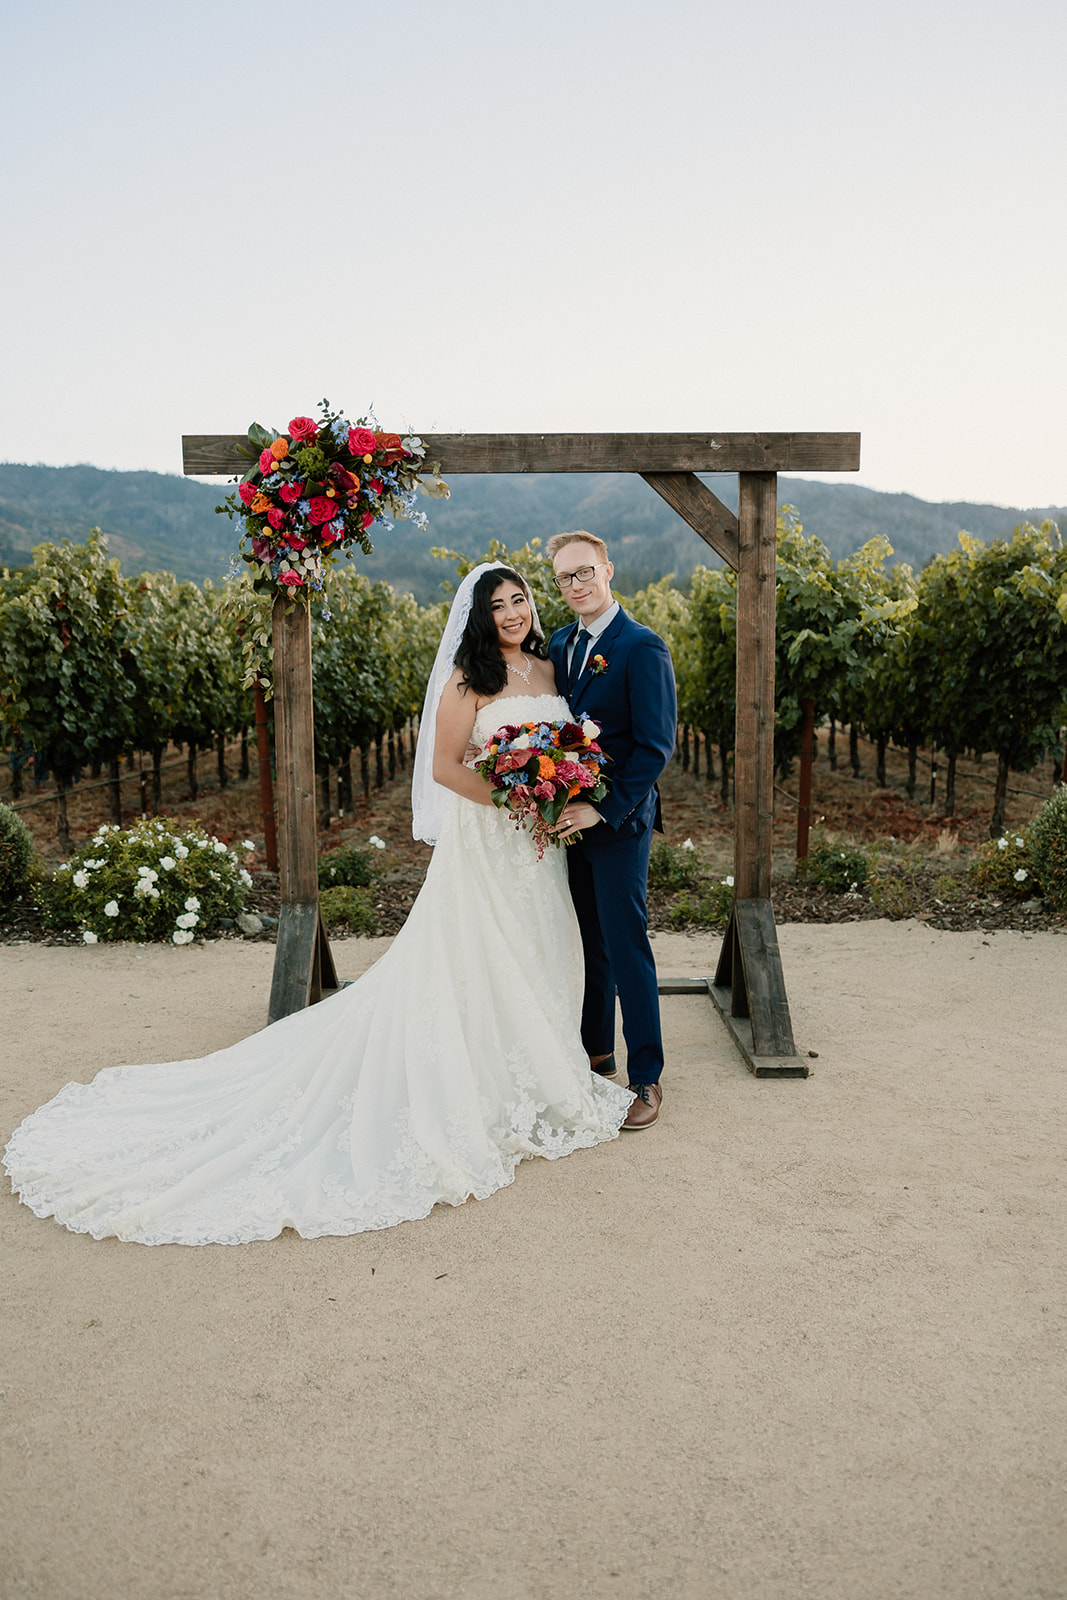 A bride and groom smiling under a wooden arch with colorful flowers, in a vineyard setting.